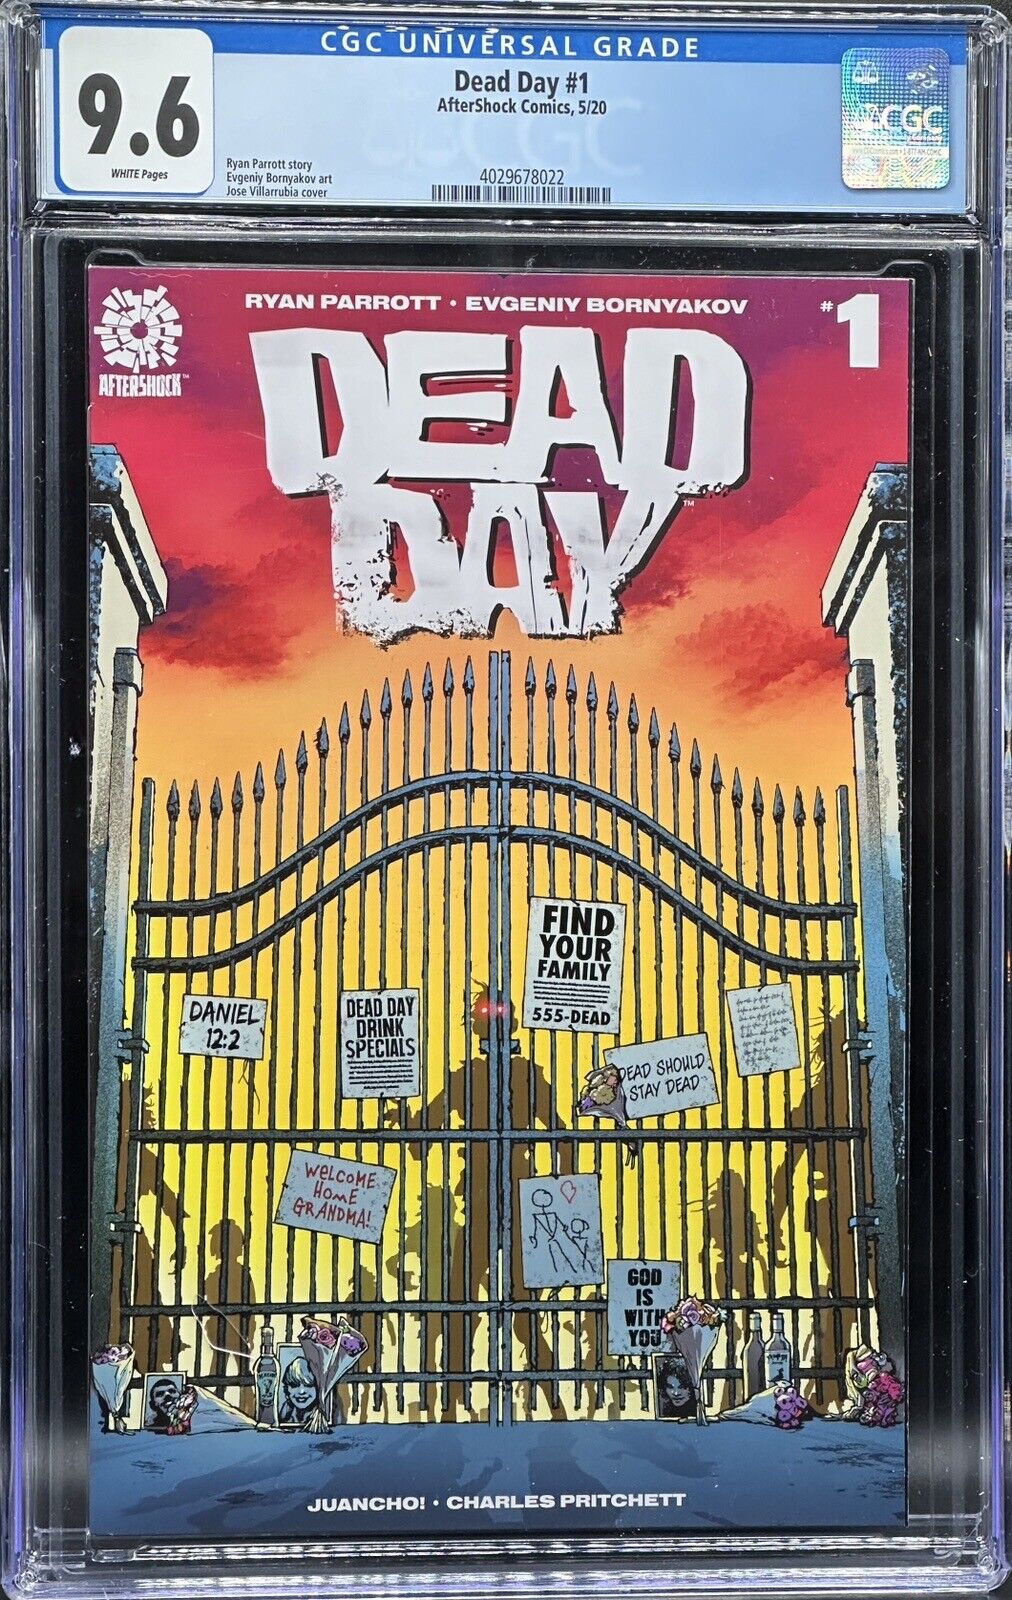 Dead Day #1 (AfterShock) CGC 9.6 4029678022